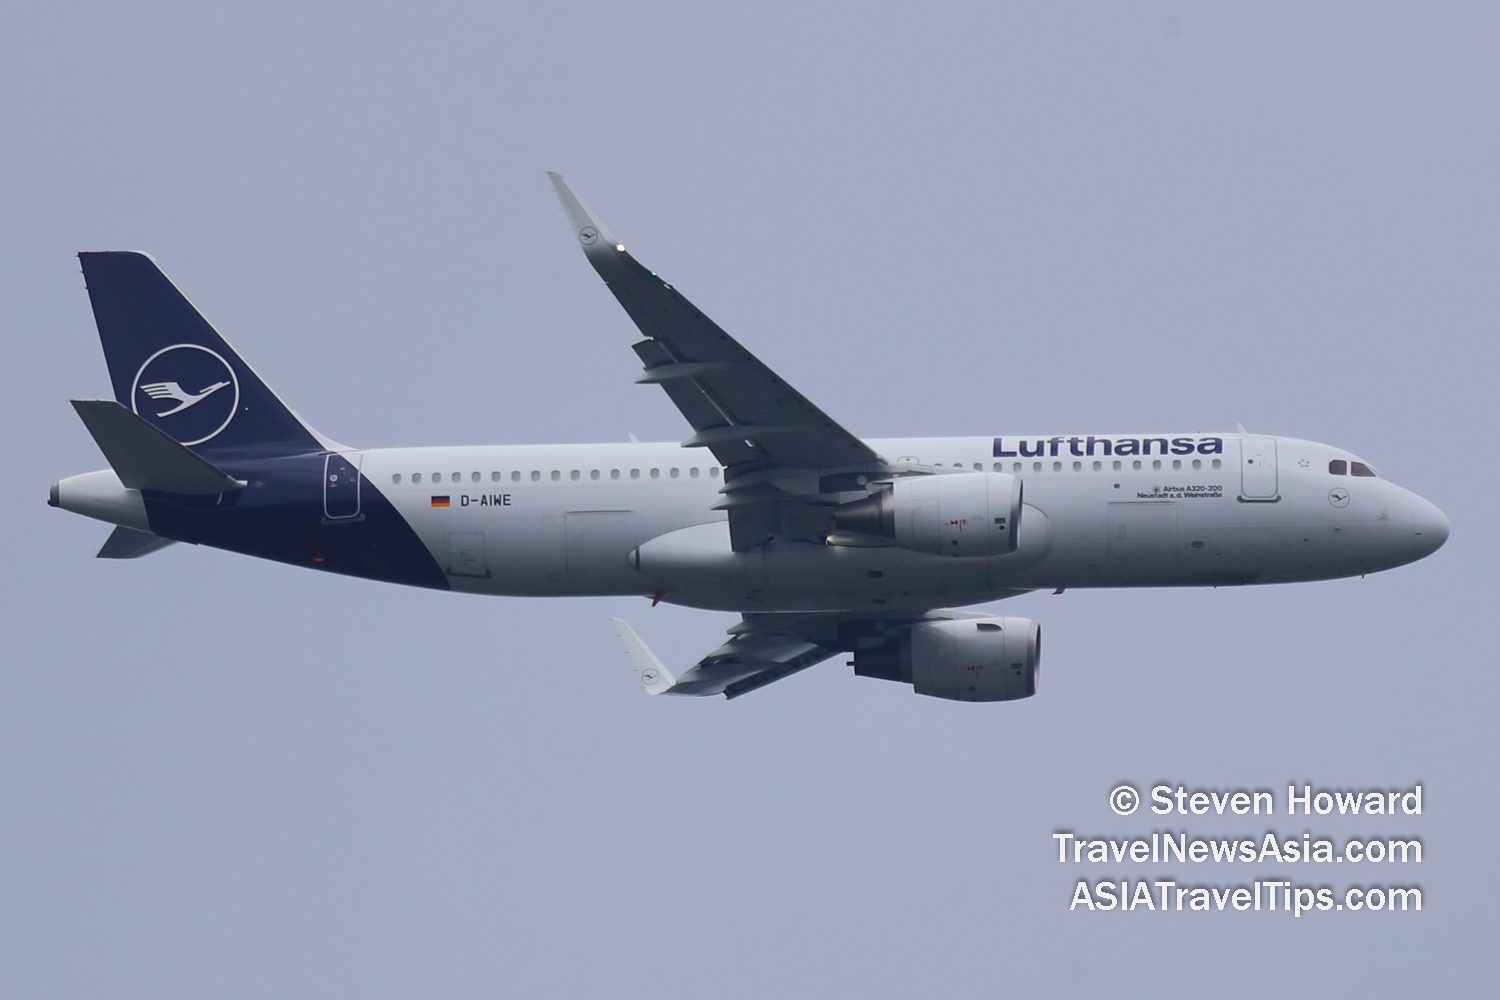 Lufthansa Airbus A320 reg D-AIWE. Picture by Steven Howard of TravelNewsAsia.com Click to enlarge.